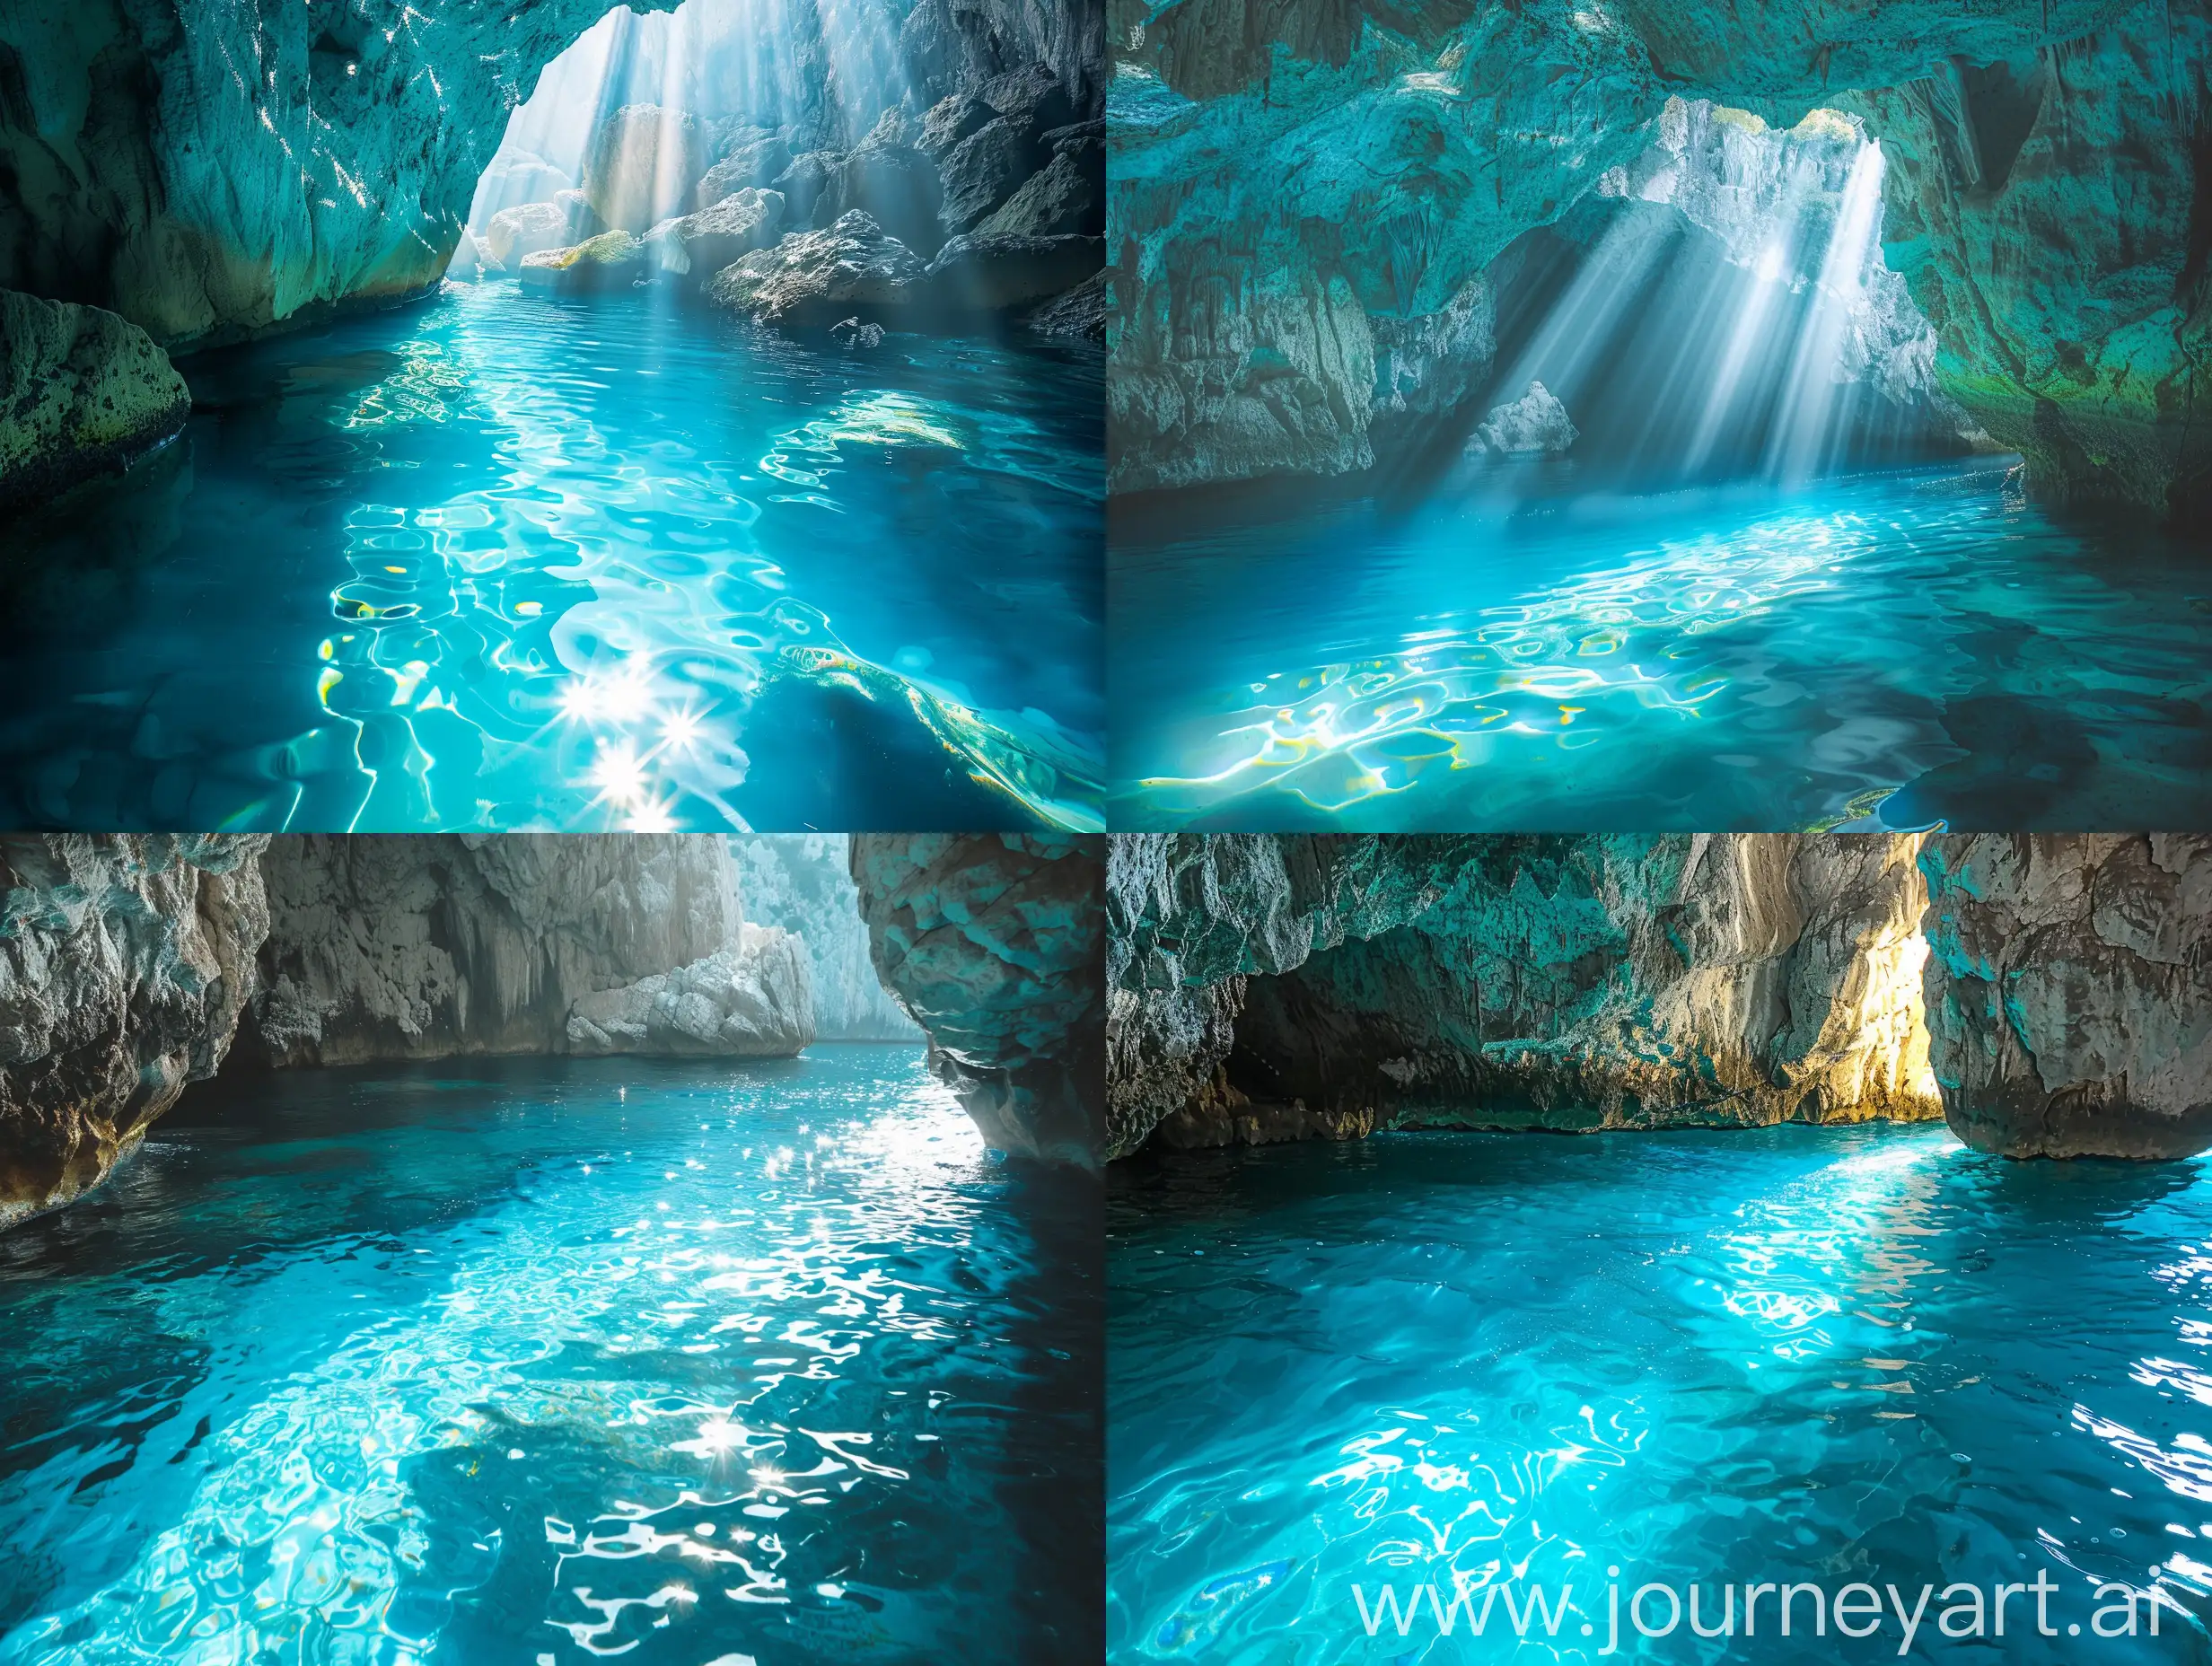 An enchanting image of the Blue Grotto in Capri, with sunlight filtering through the crystal-clear waters to create a mesmerizing blue hue. The tranquil atmosphere and stunning natural beauty make it a must-see destination for travelers seeking adventure and wonder.